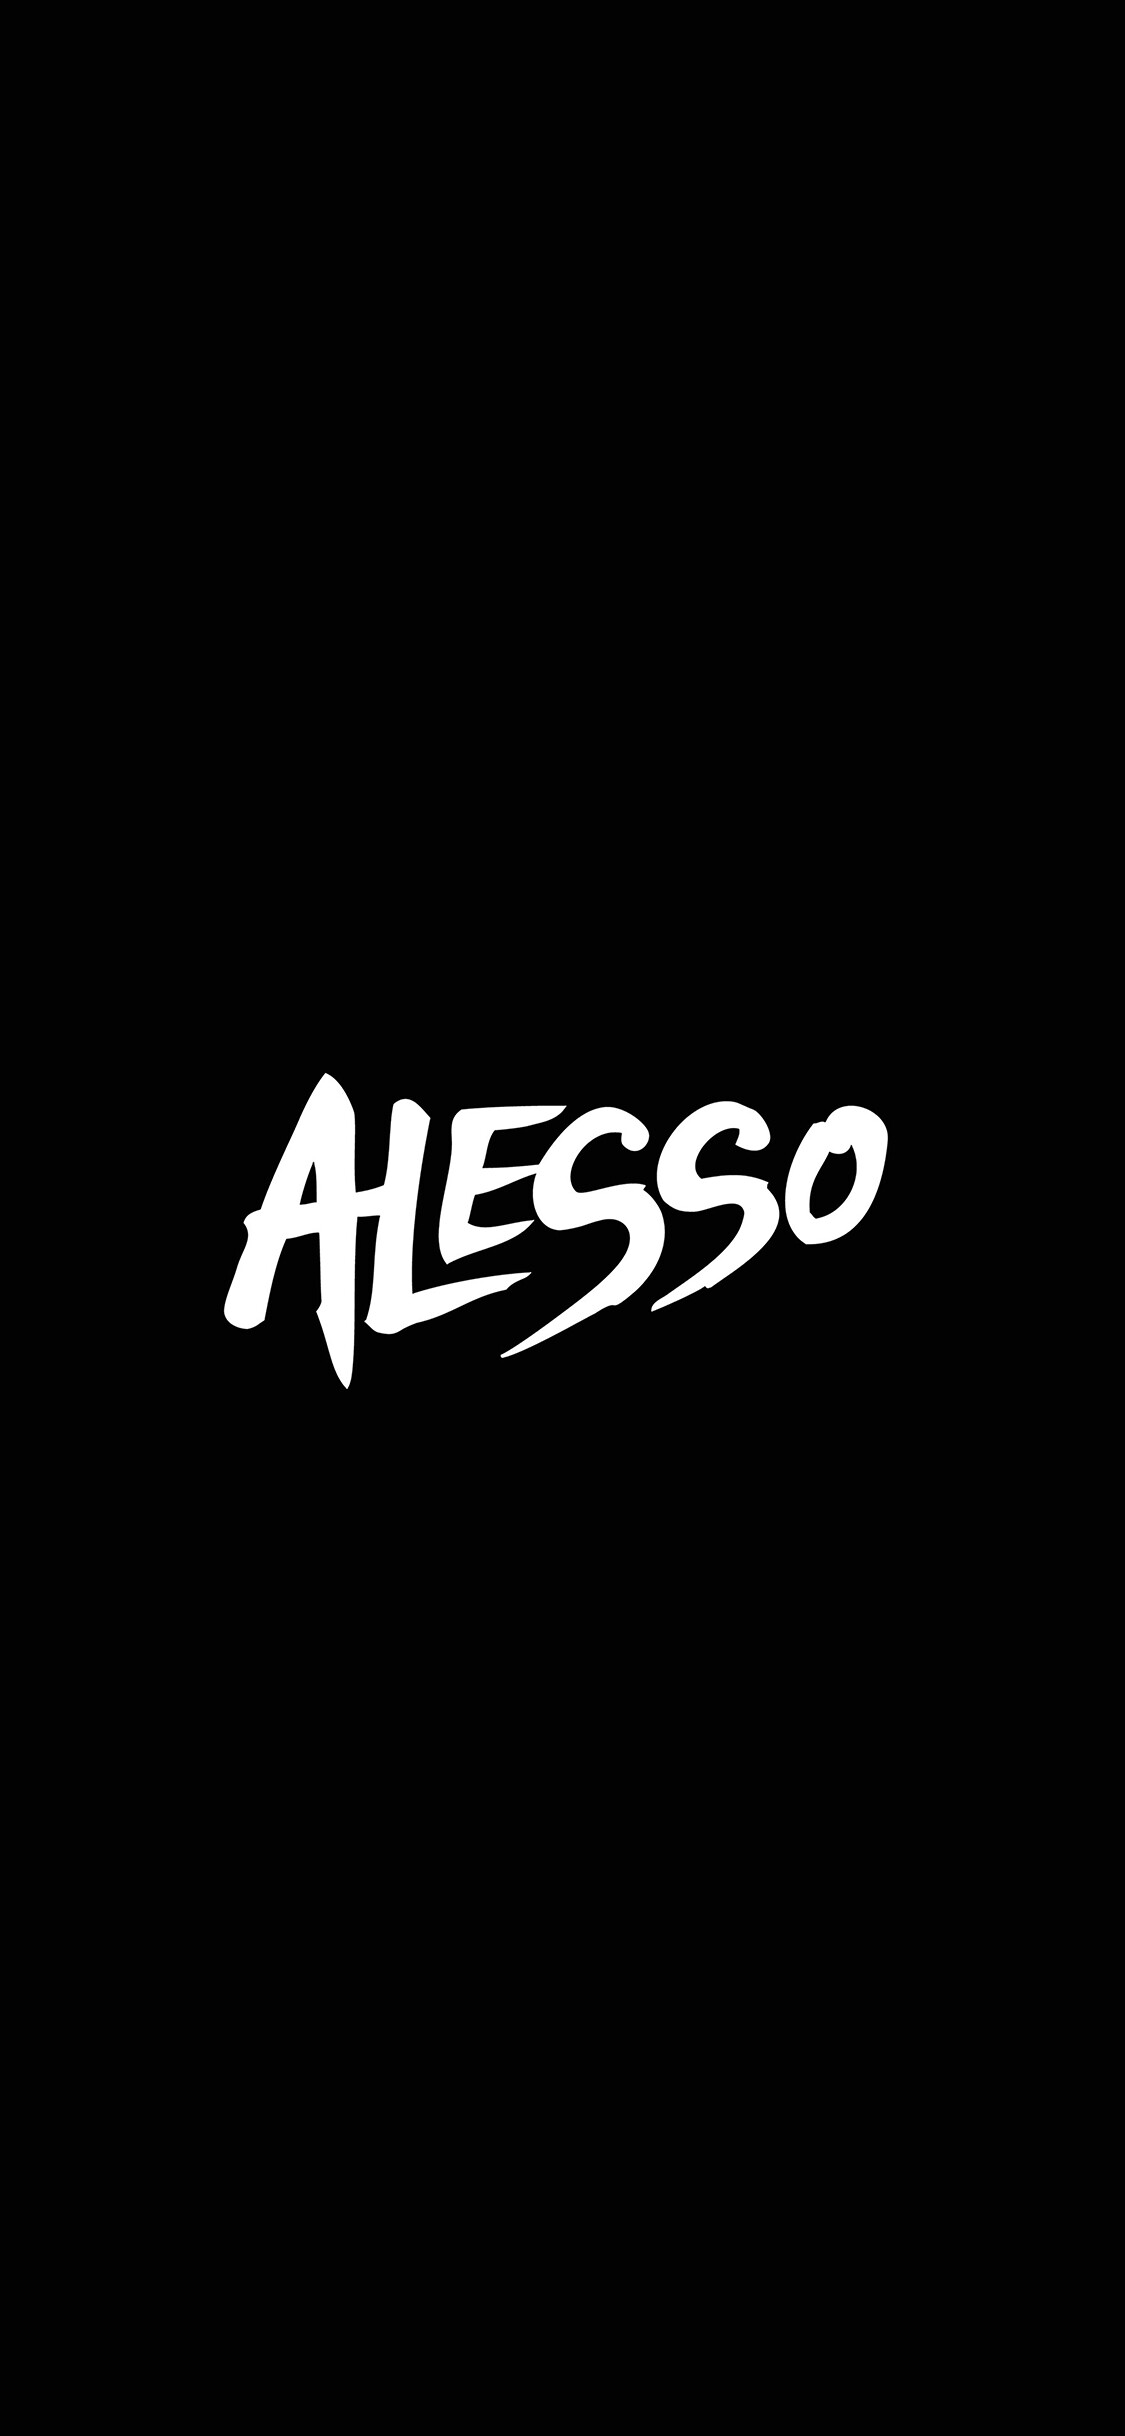 Alesso: He was ranked 13th on DJ Magazine's 2015 list of the top 100 DJs. 1130x2440 HD Wallpaper.